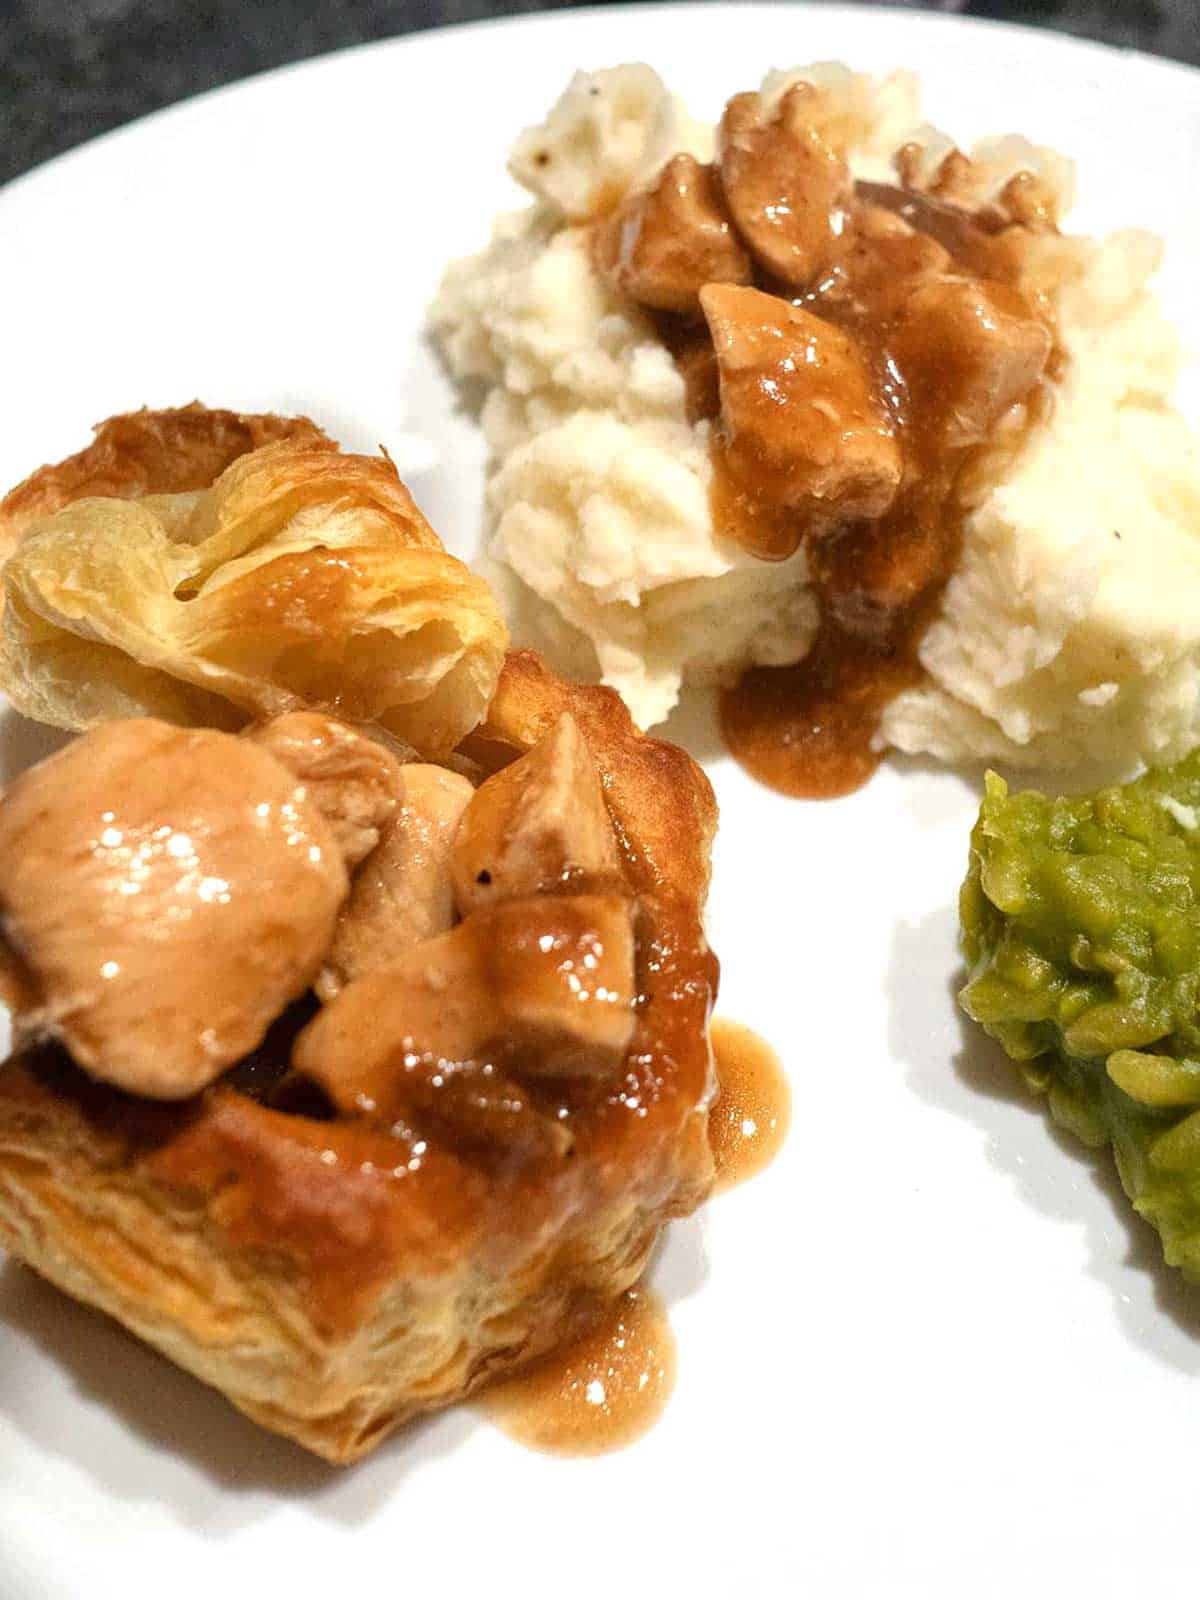 Chicken vol au vents on plate with mashed potatoes and peas.